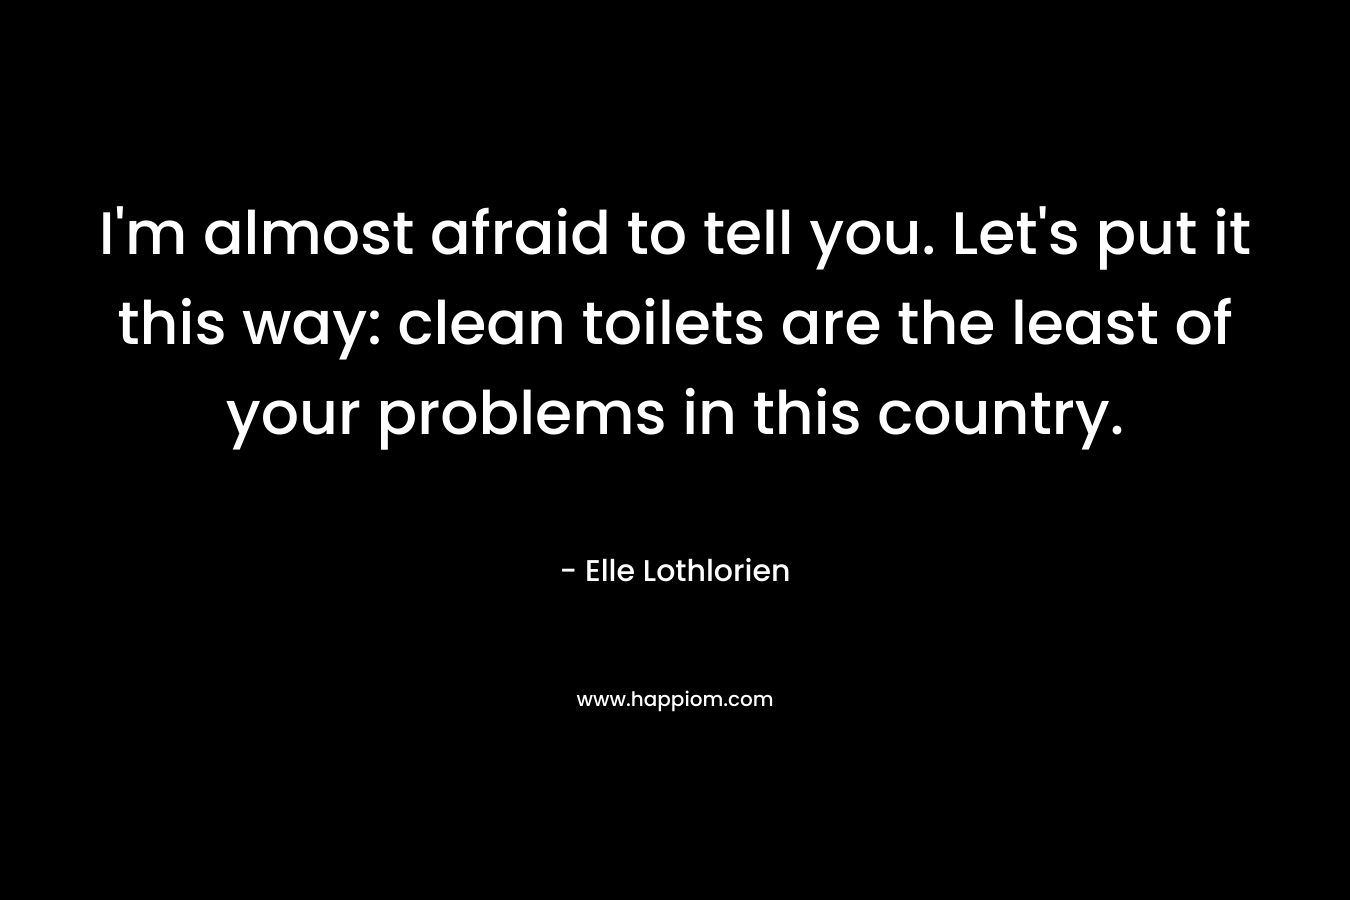 I'm almost afraid to tell you. Let's put it this way: clean toilets are the least of your problems in this country.